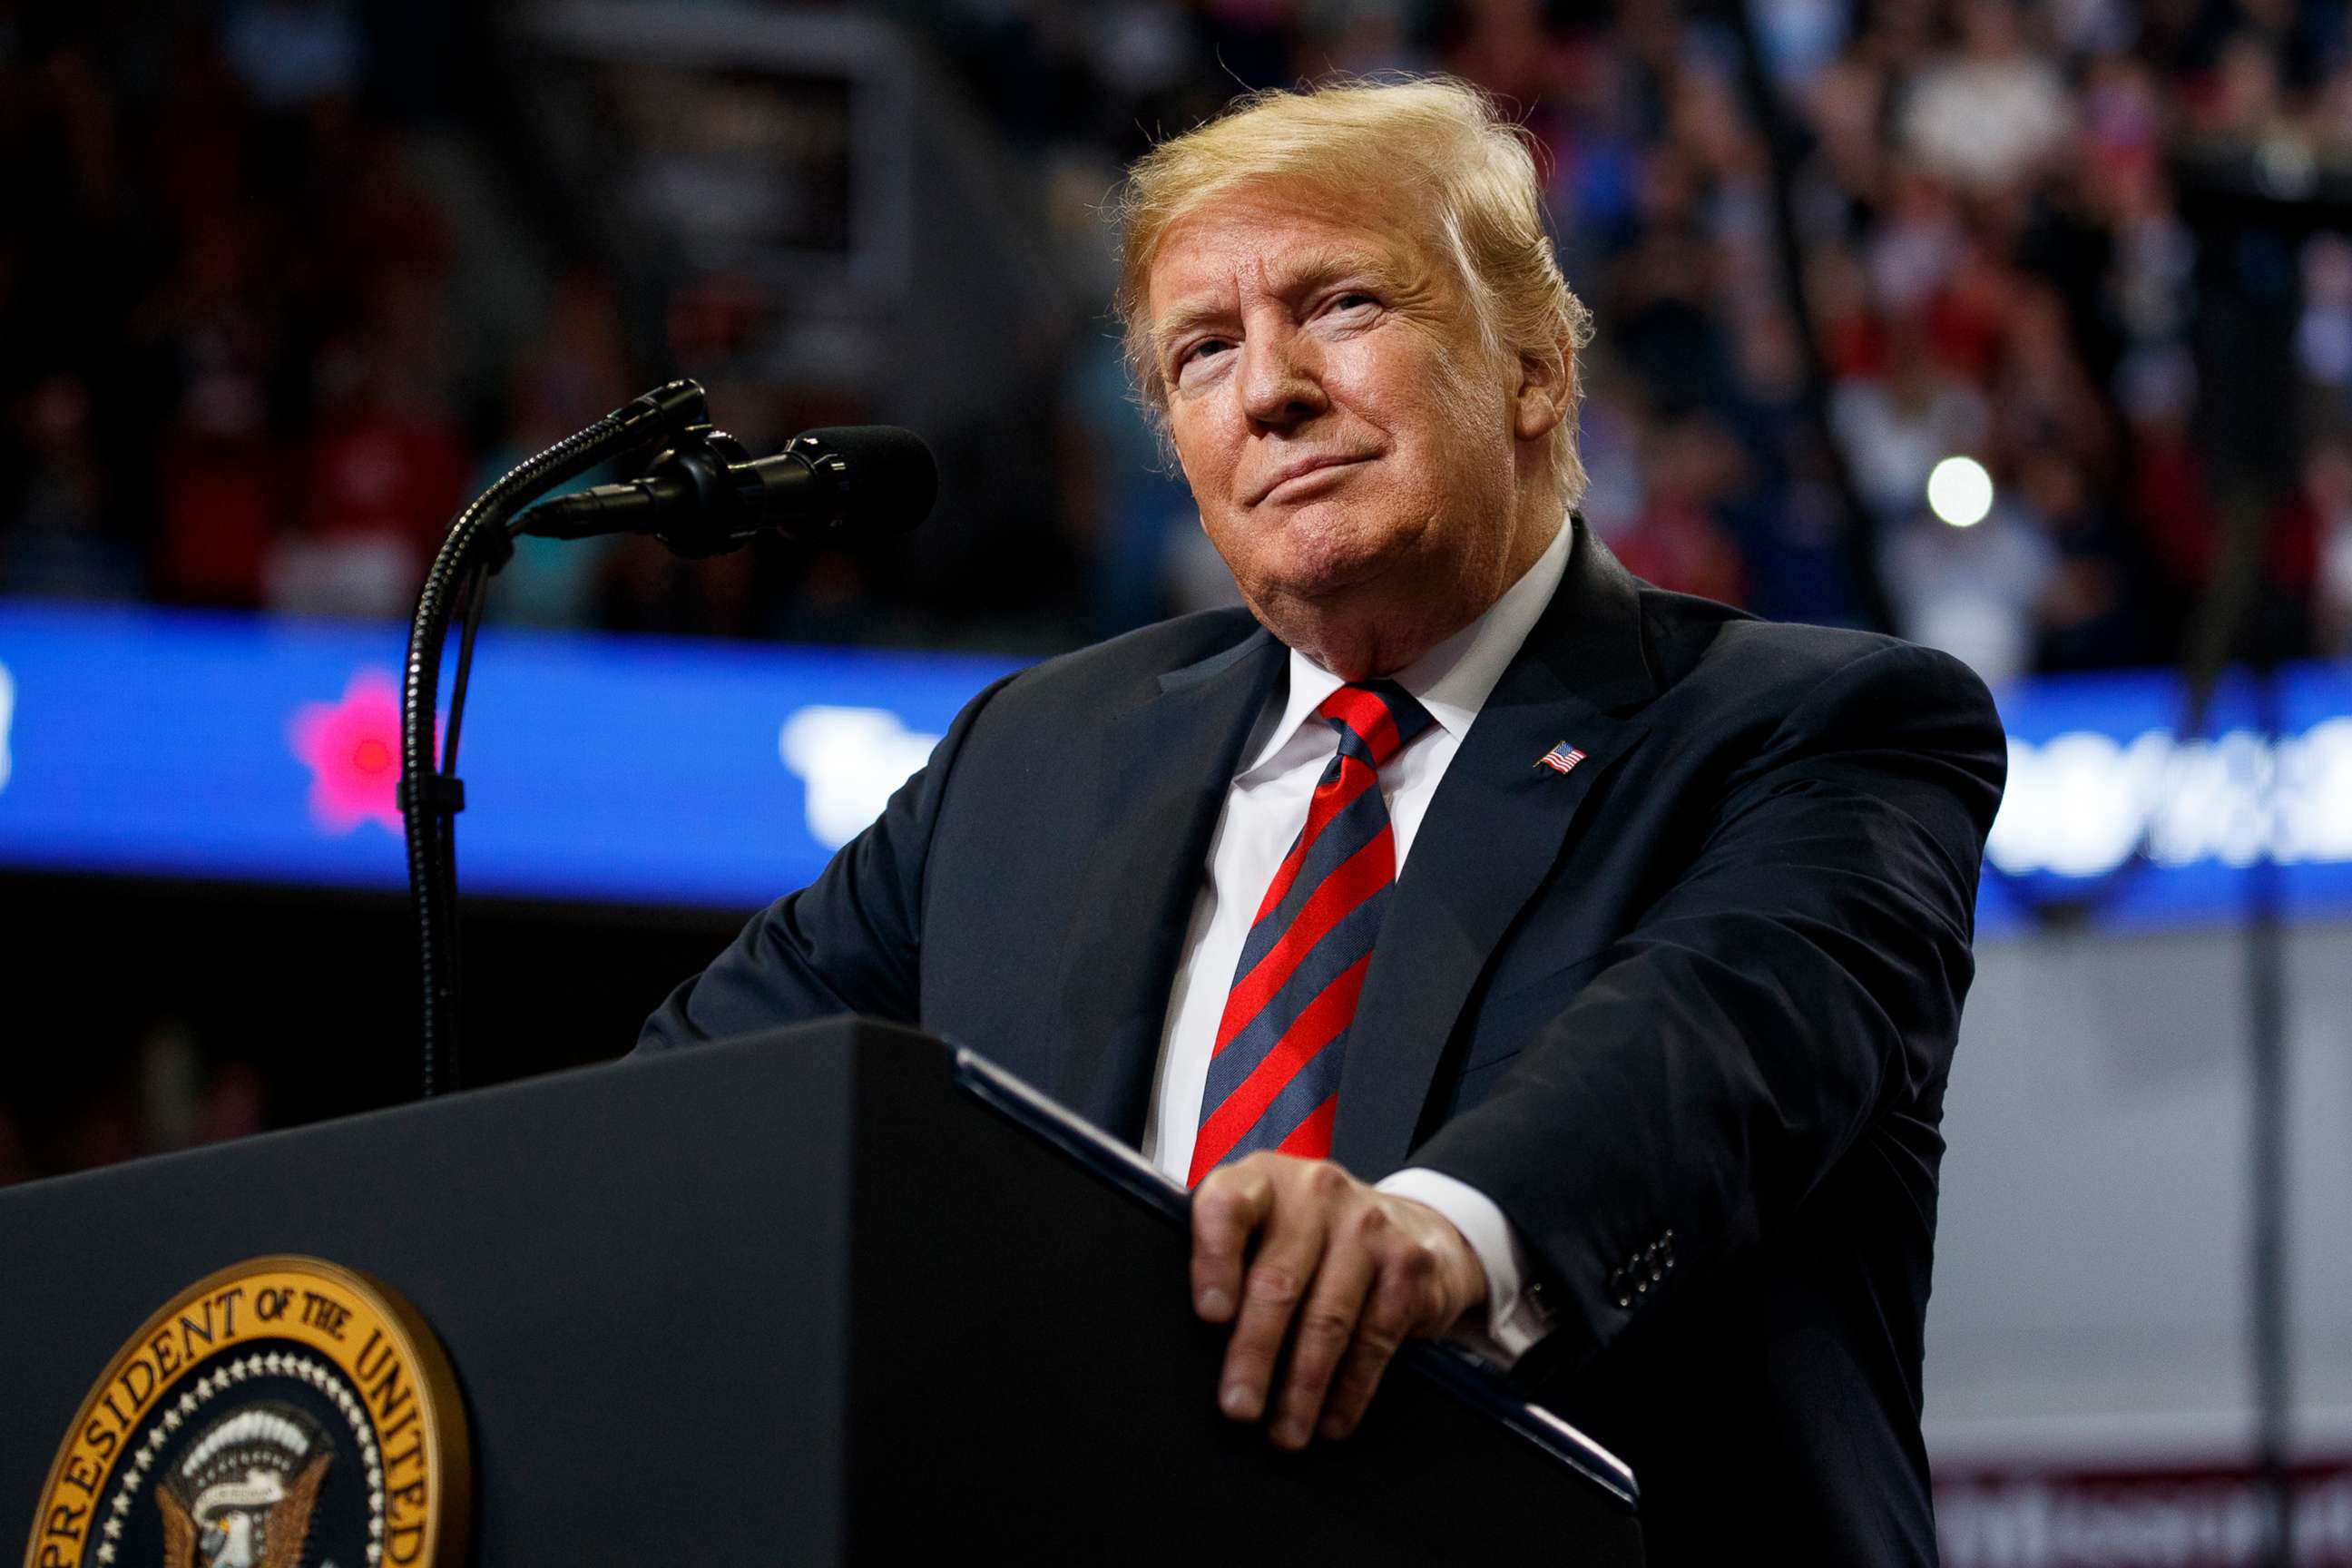 PHOTO: President Donald Trump speaks during a campaign rally, Sept. 21, 2018, in Springfield, Mo.